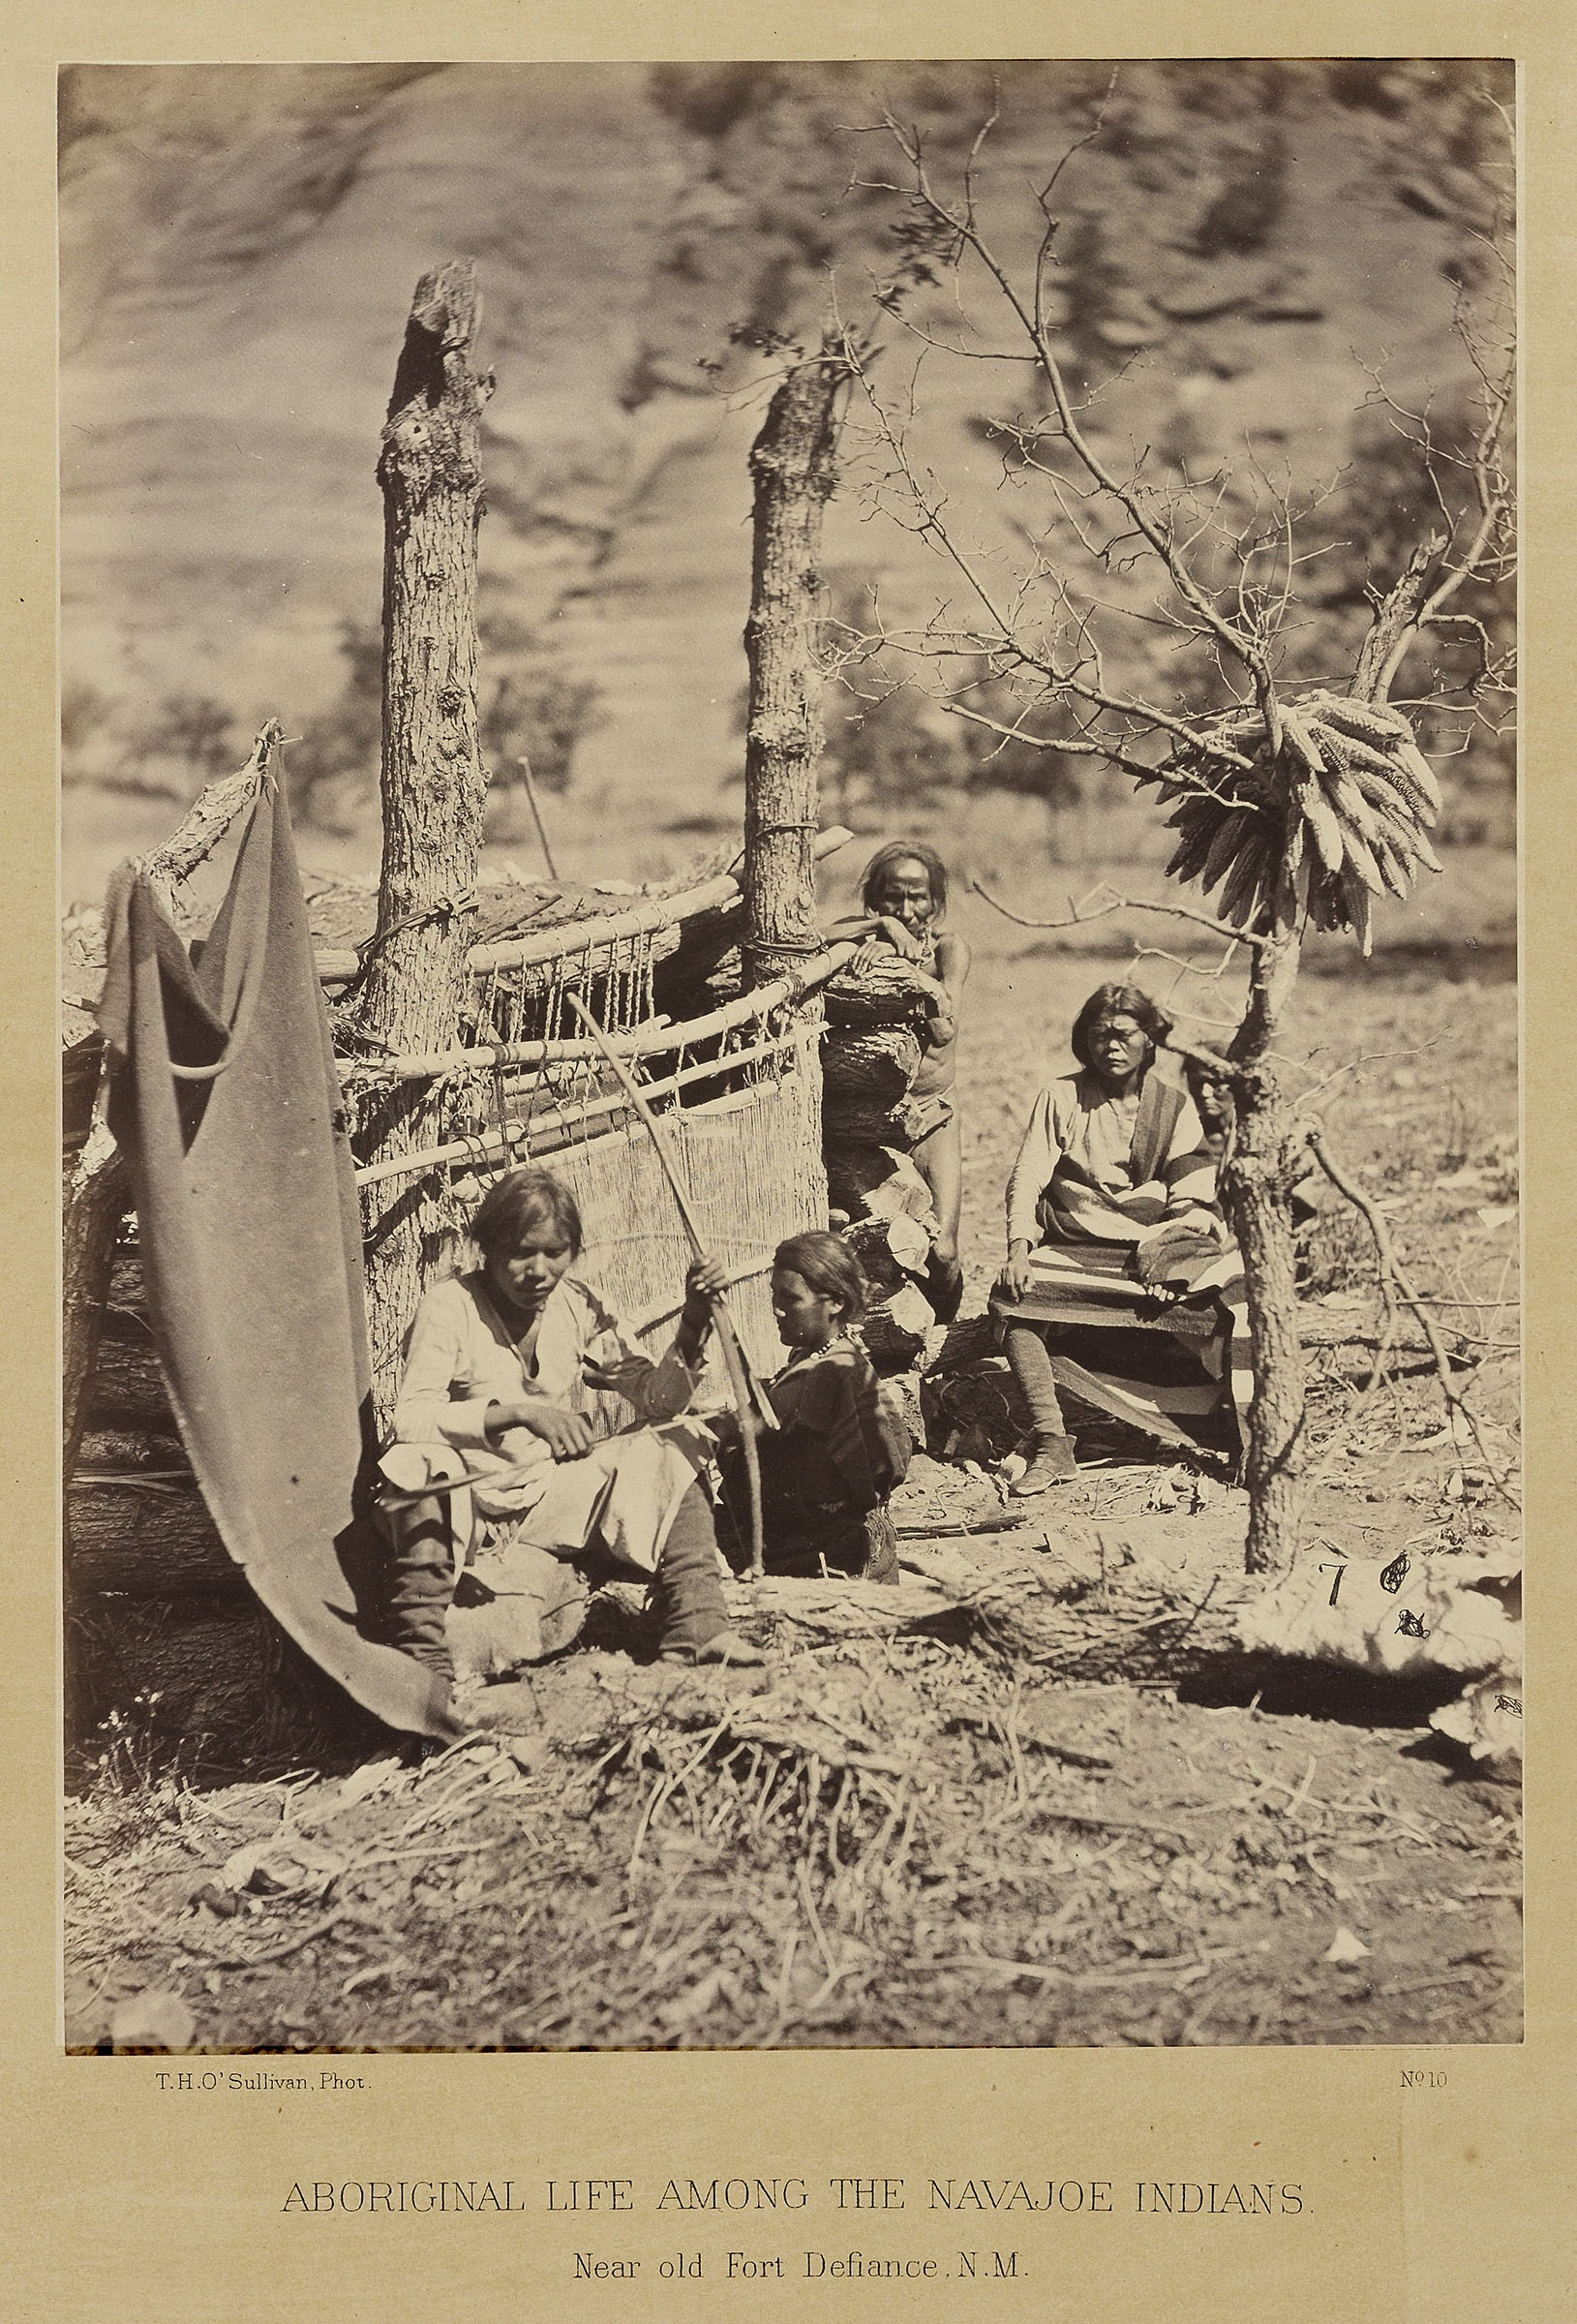 Four Navajo people sit outside near trees